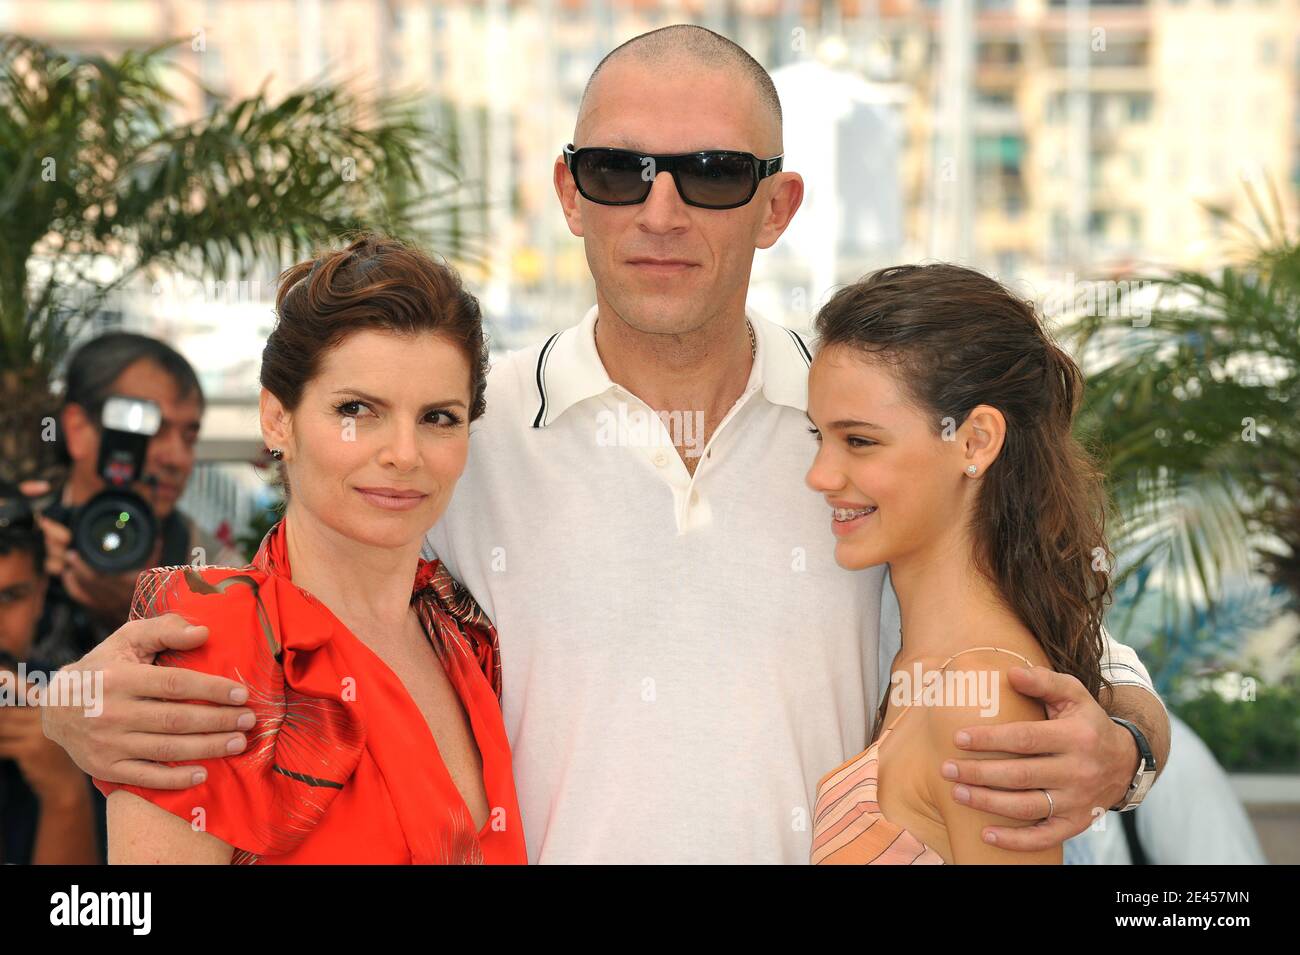 (R-L) Laura Neiva, Vincent Cassel and Debora Bloch attend the photocall for the film 'A Deriva', at the Palais des Festivals during 62nd International Cannes Film Festival in Cannes, France on May 21, 2009. Photo by Nebinger-Orban/ABACAPRESS.COM Stock Photo